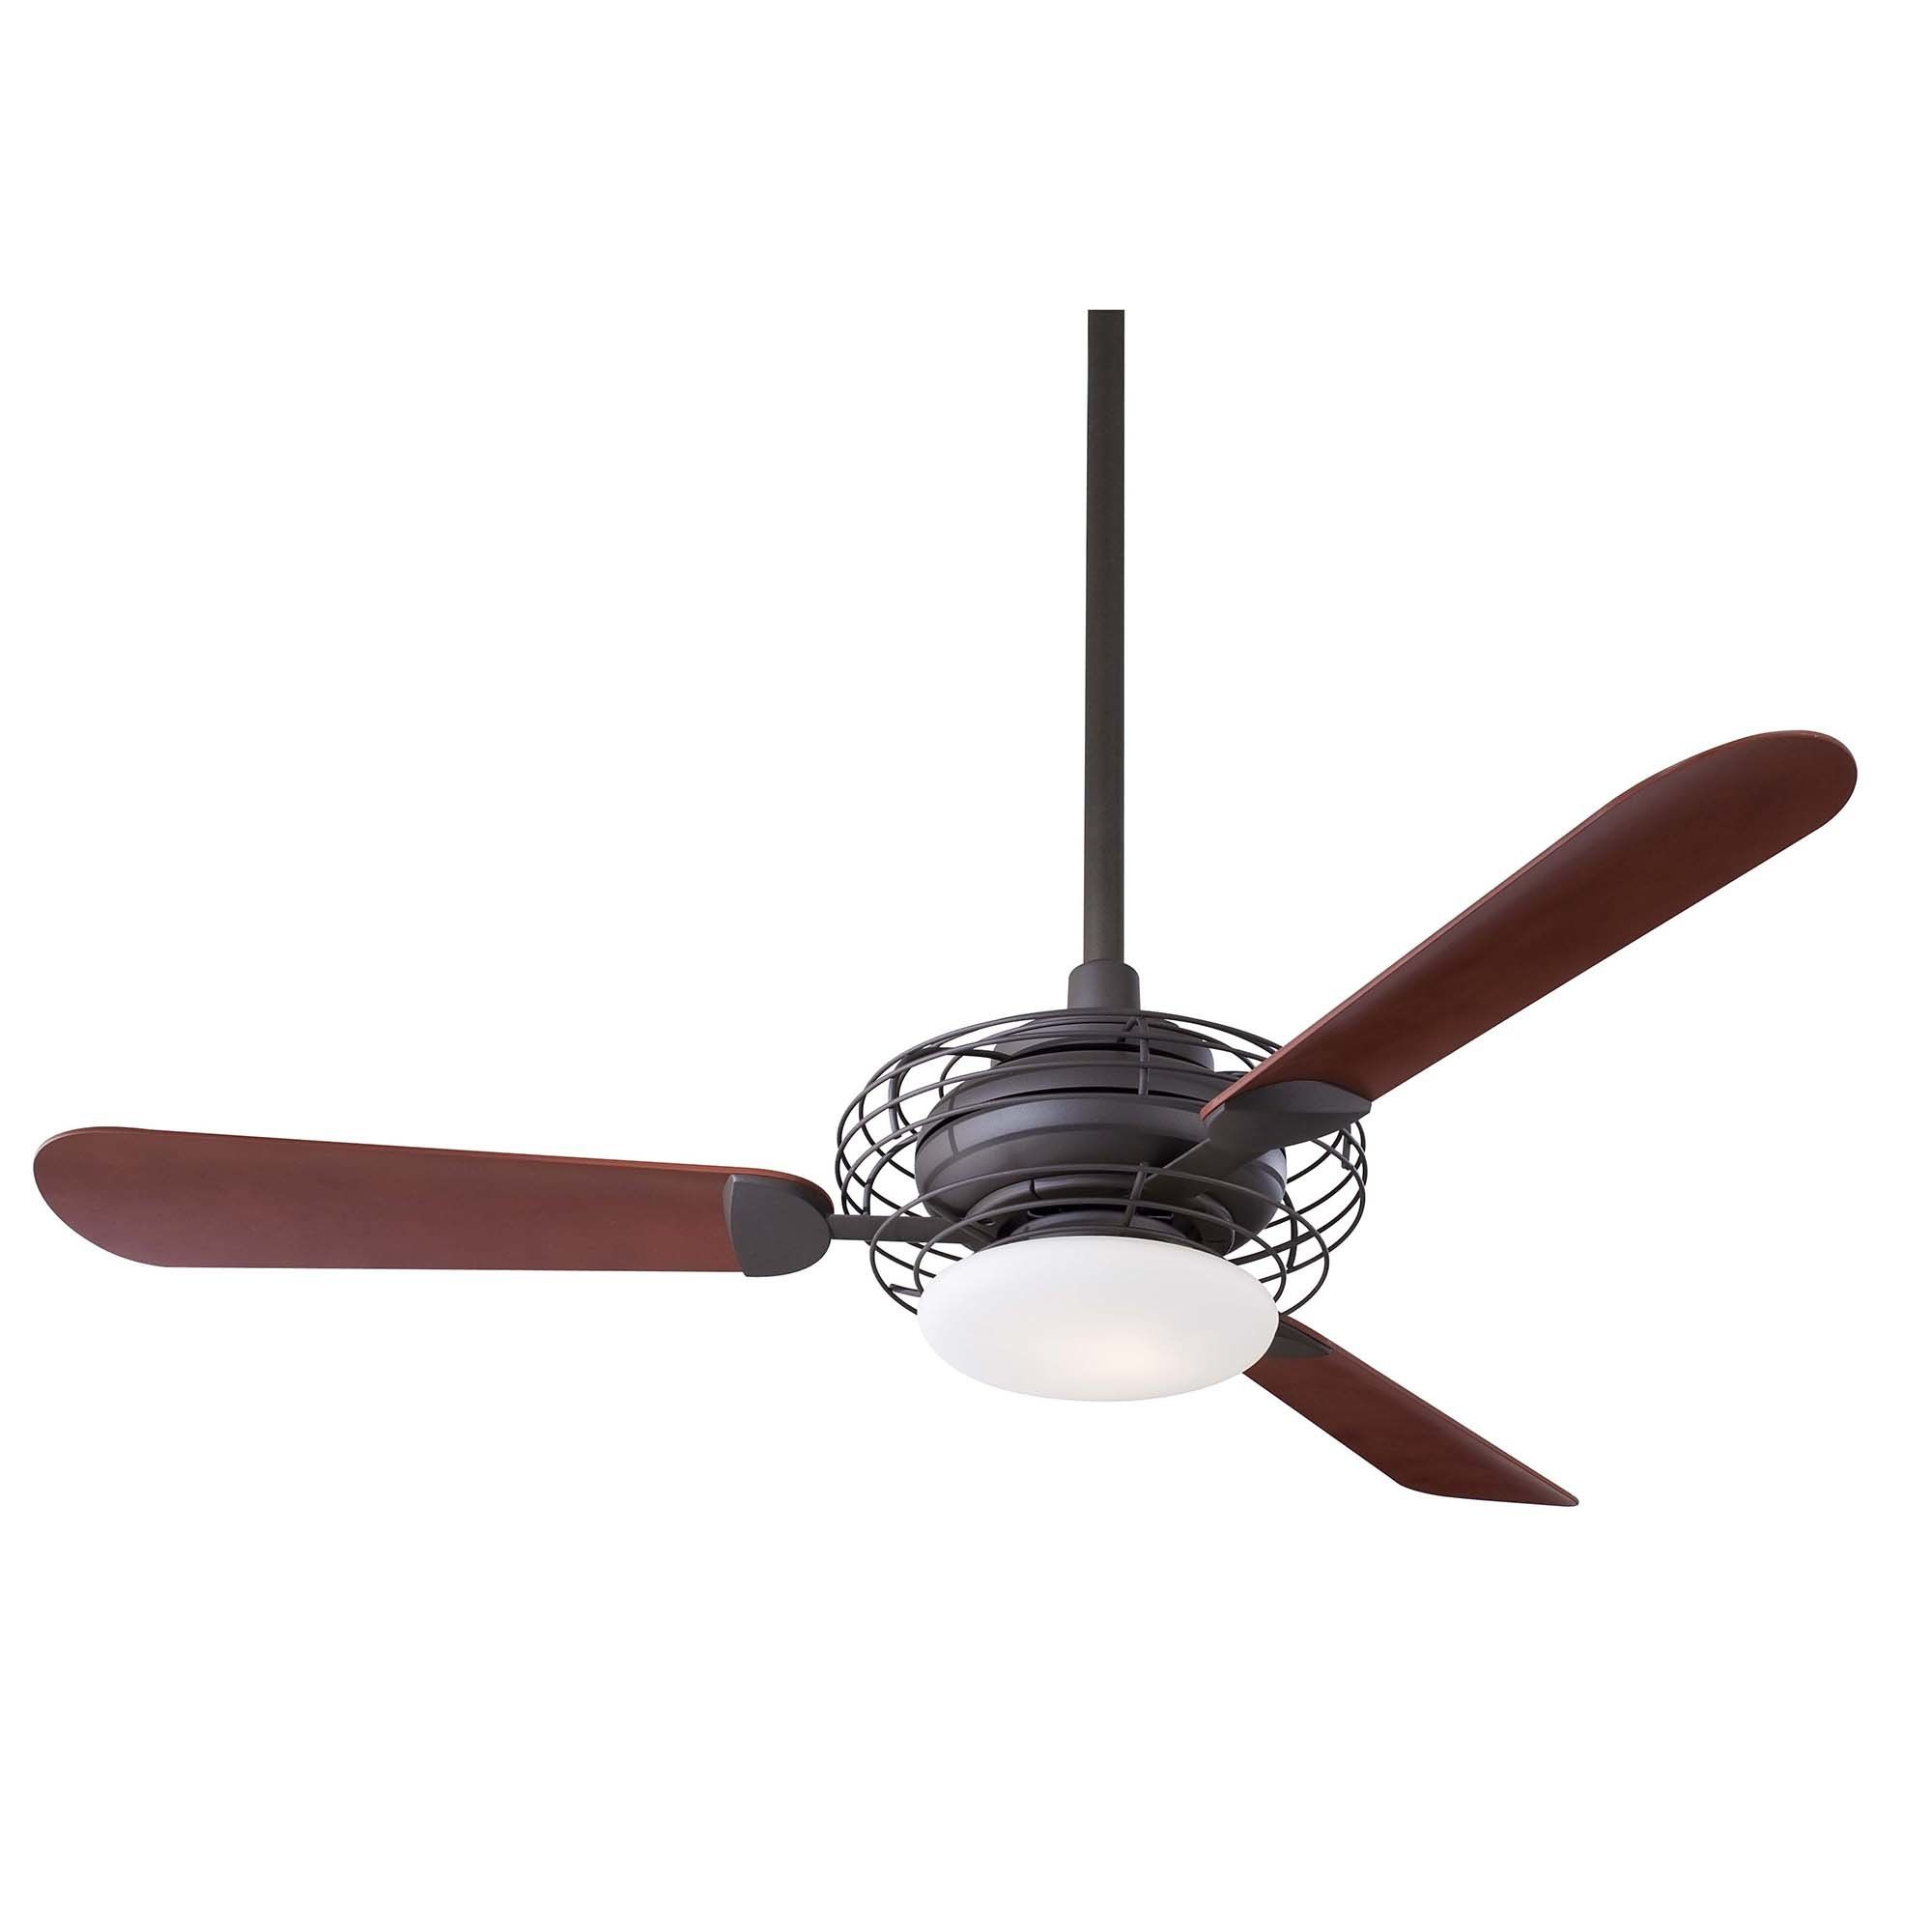 Acero Retro 3 Blade Led Ceiling Fans In Well Known 52" Acero Retro 3 Blade Led Ceiling Fan (View 3 of 20)